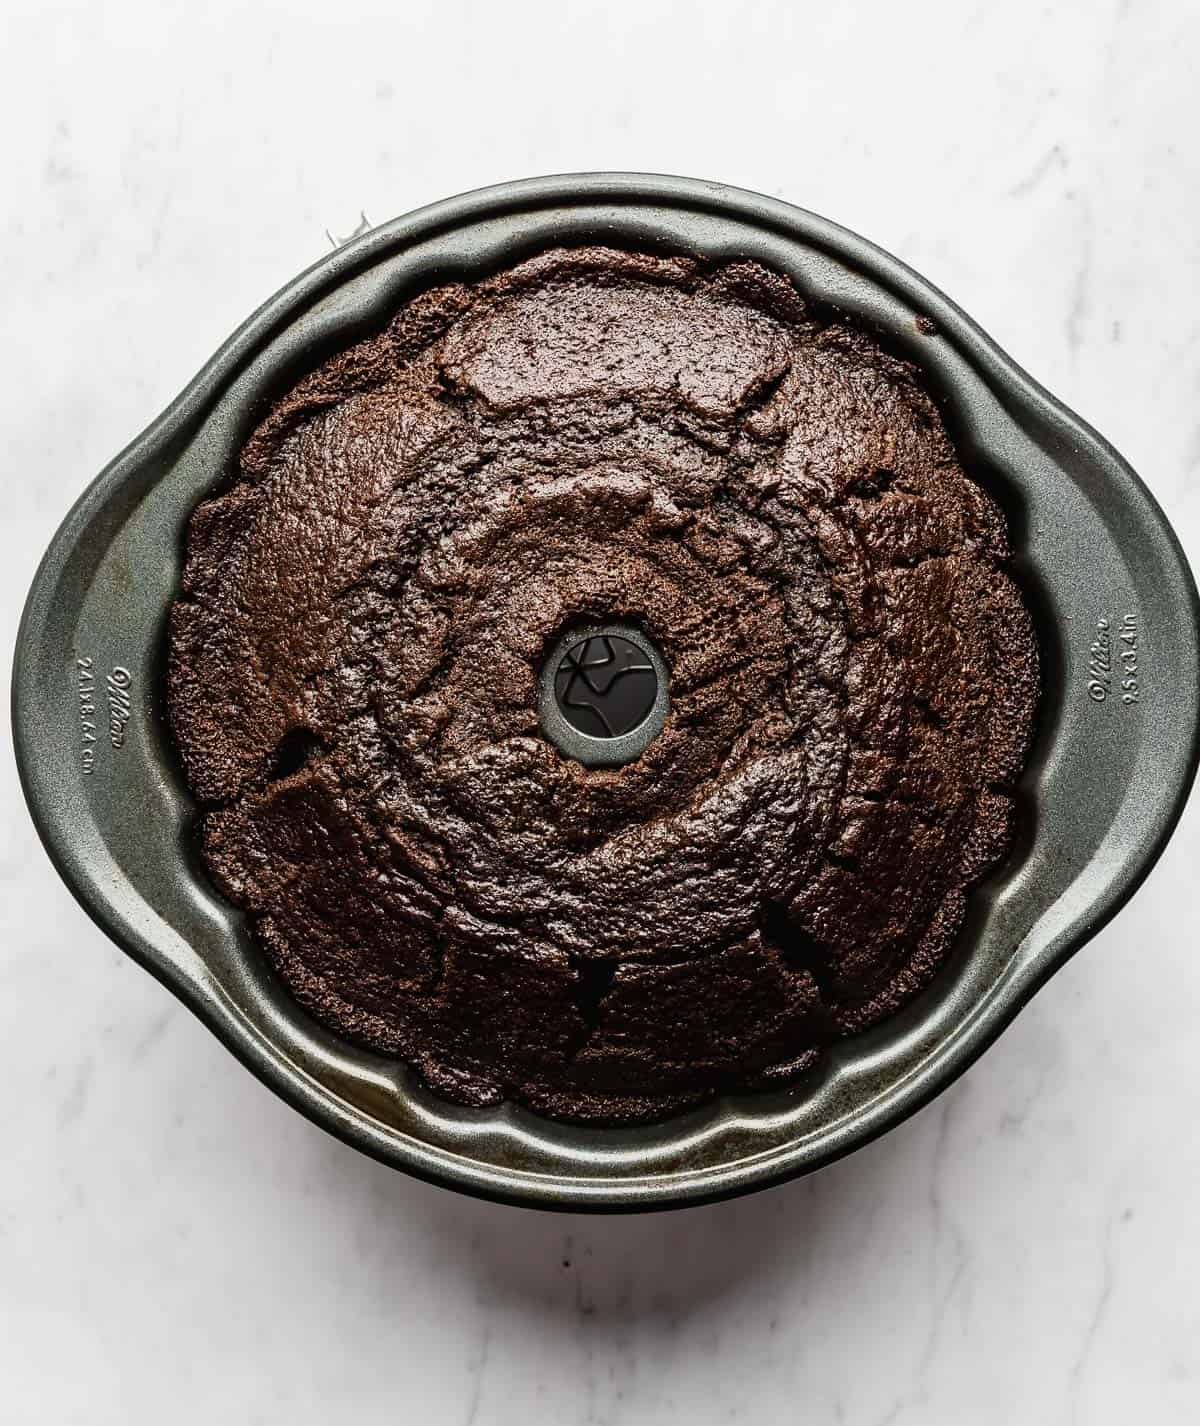 A baked chocolate Bundt Cake in a bundt pan on a white background.